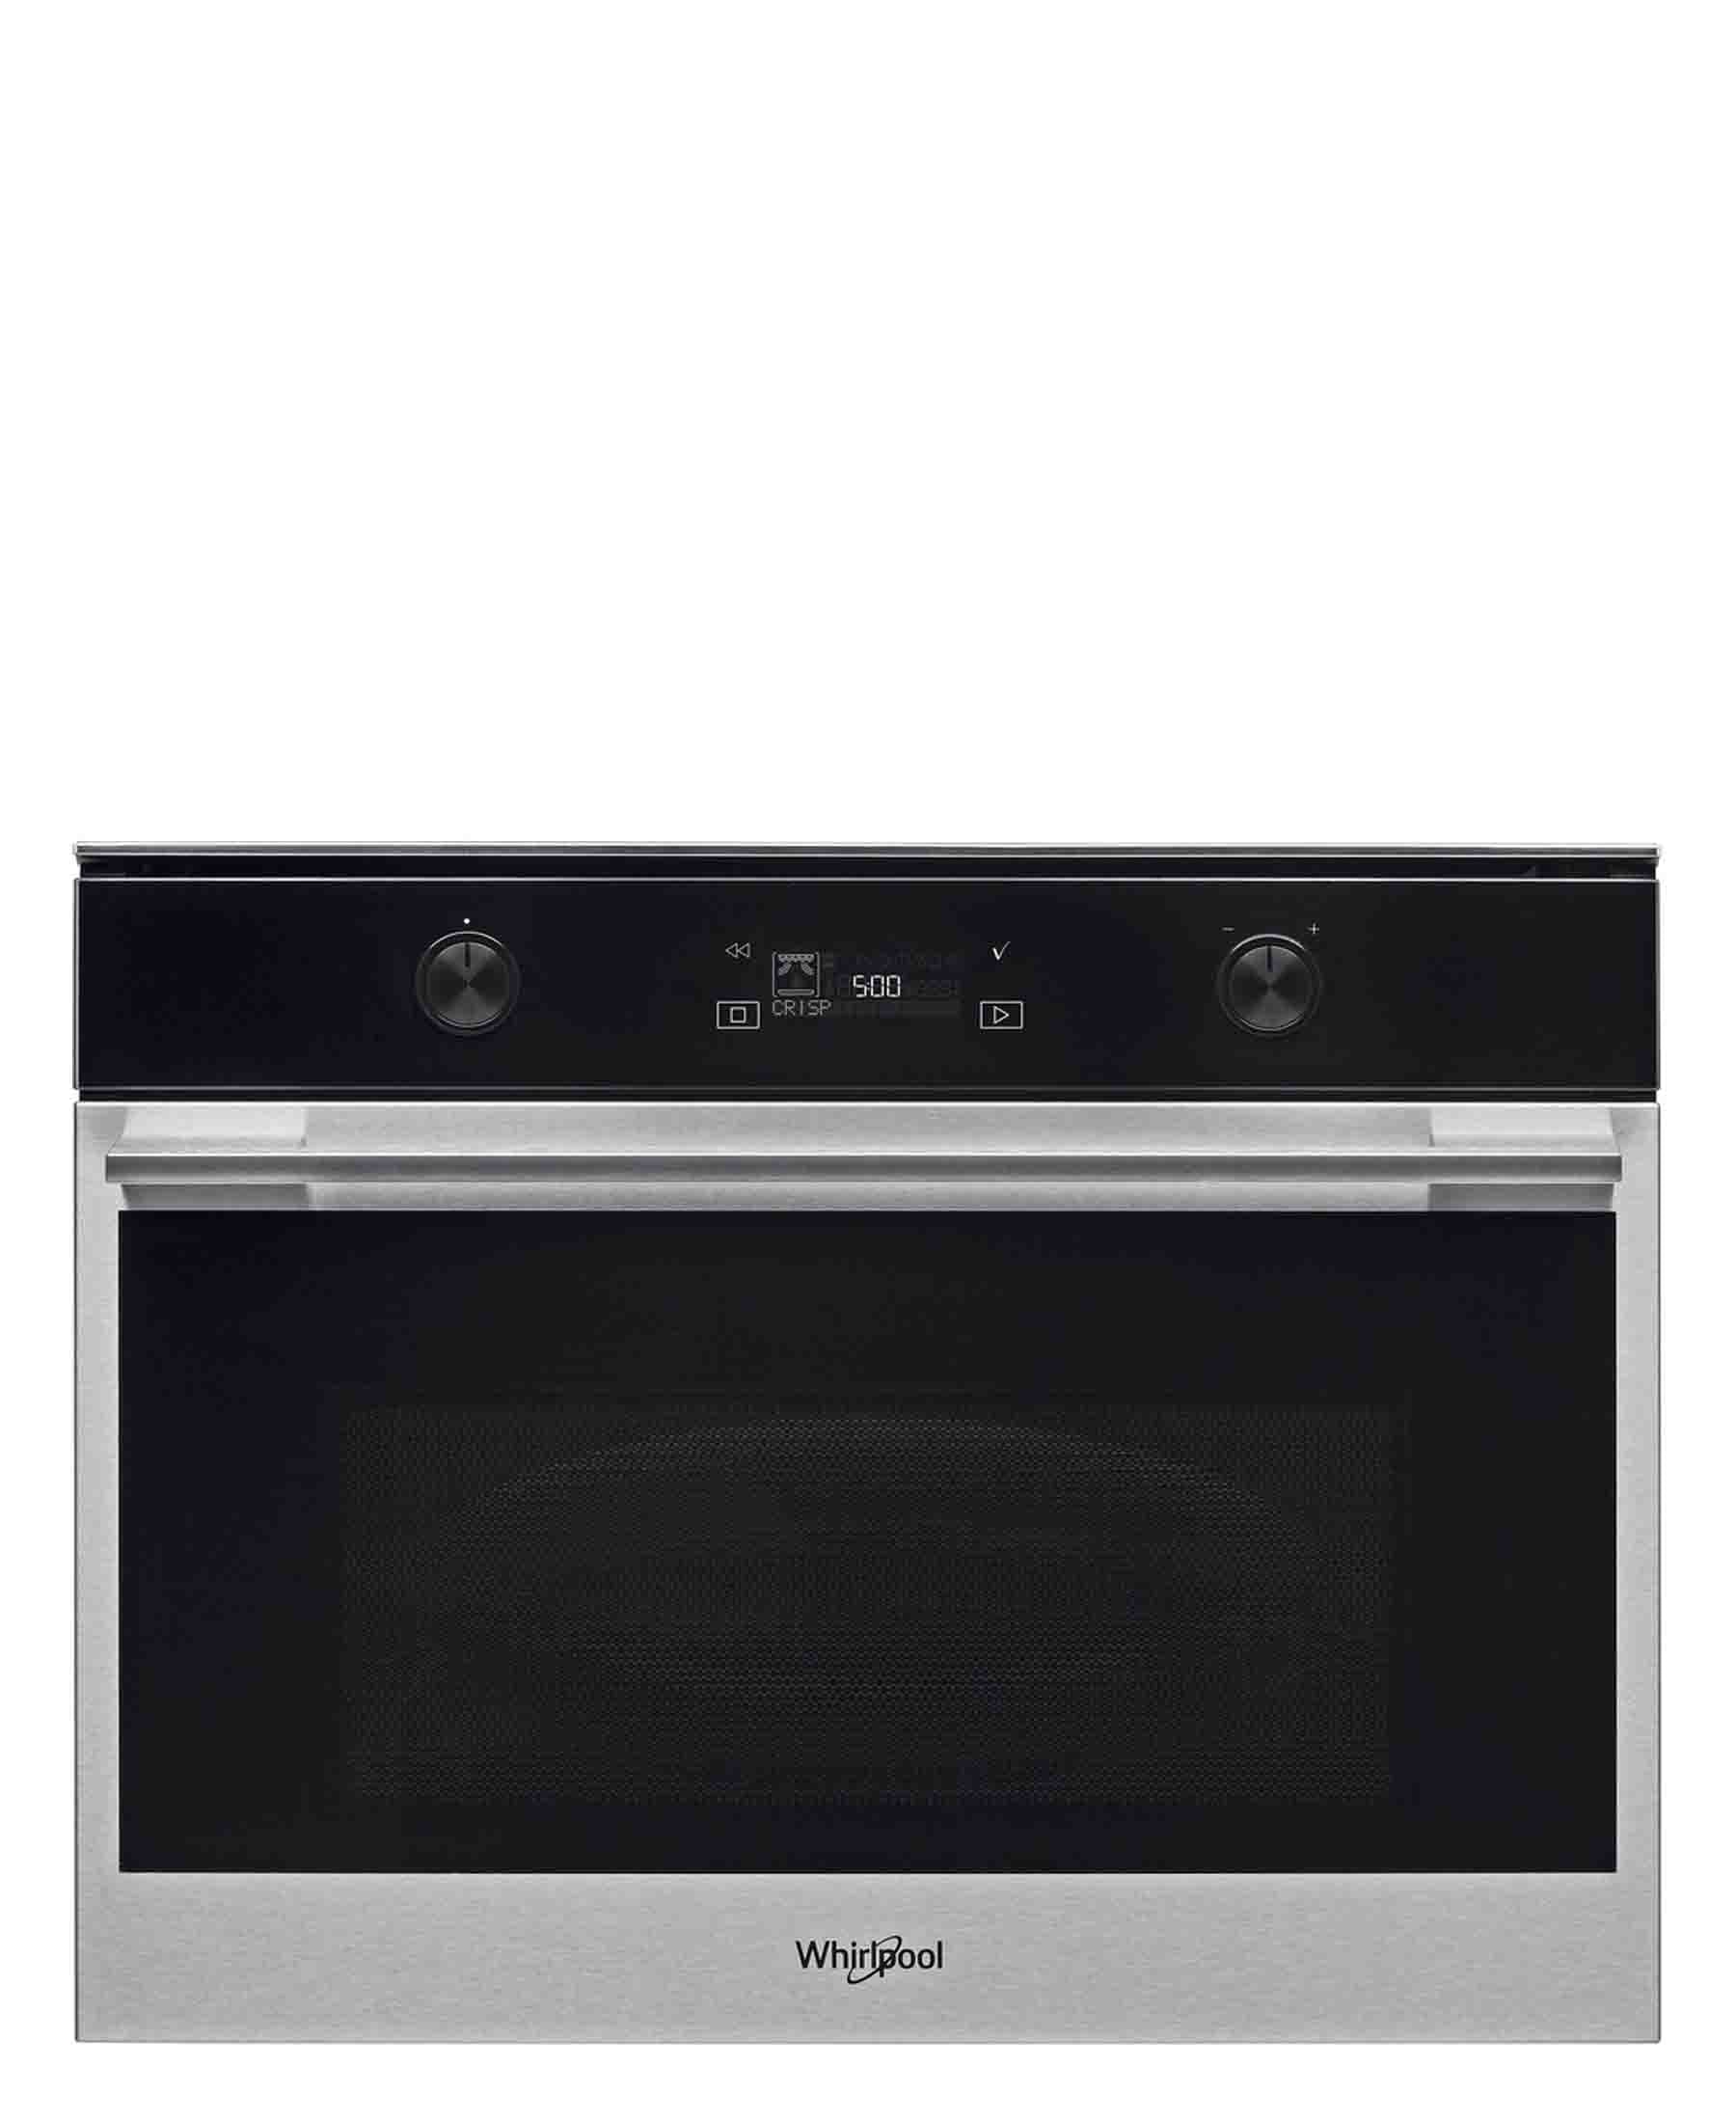 Whirlpool 40L built-in Microwave Oven - Black & Silver